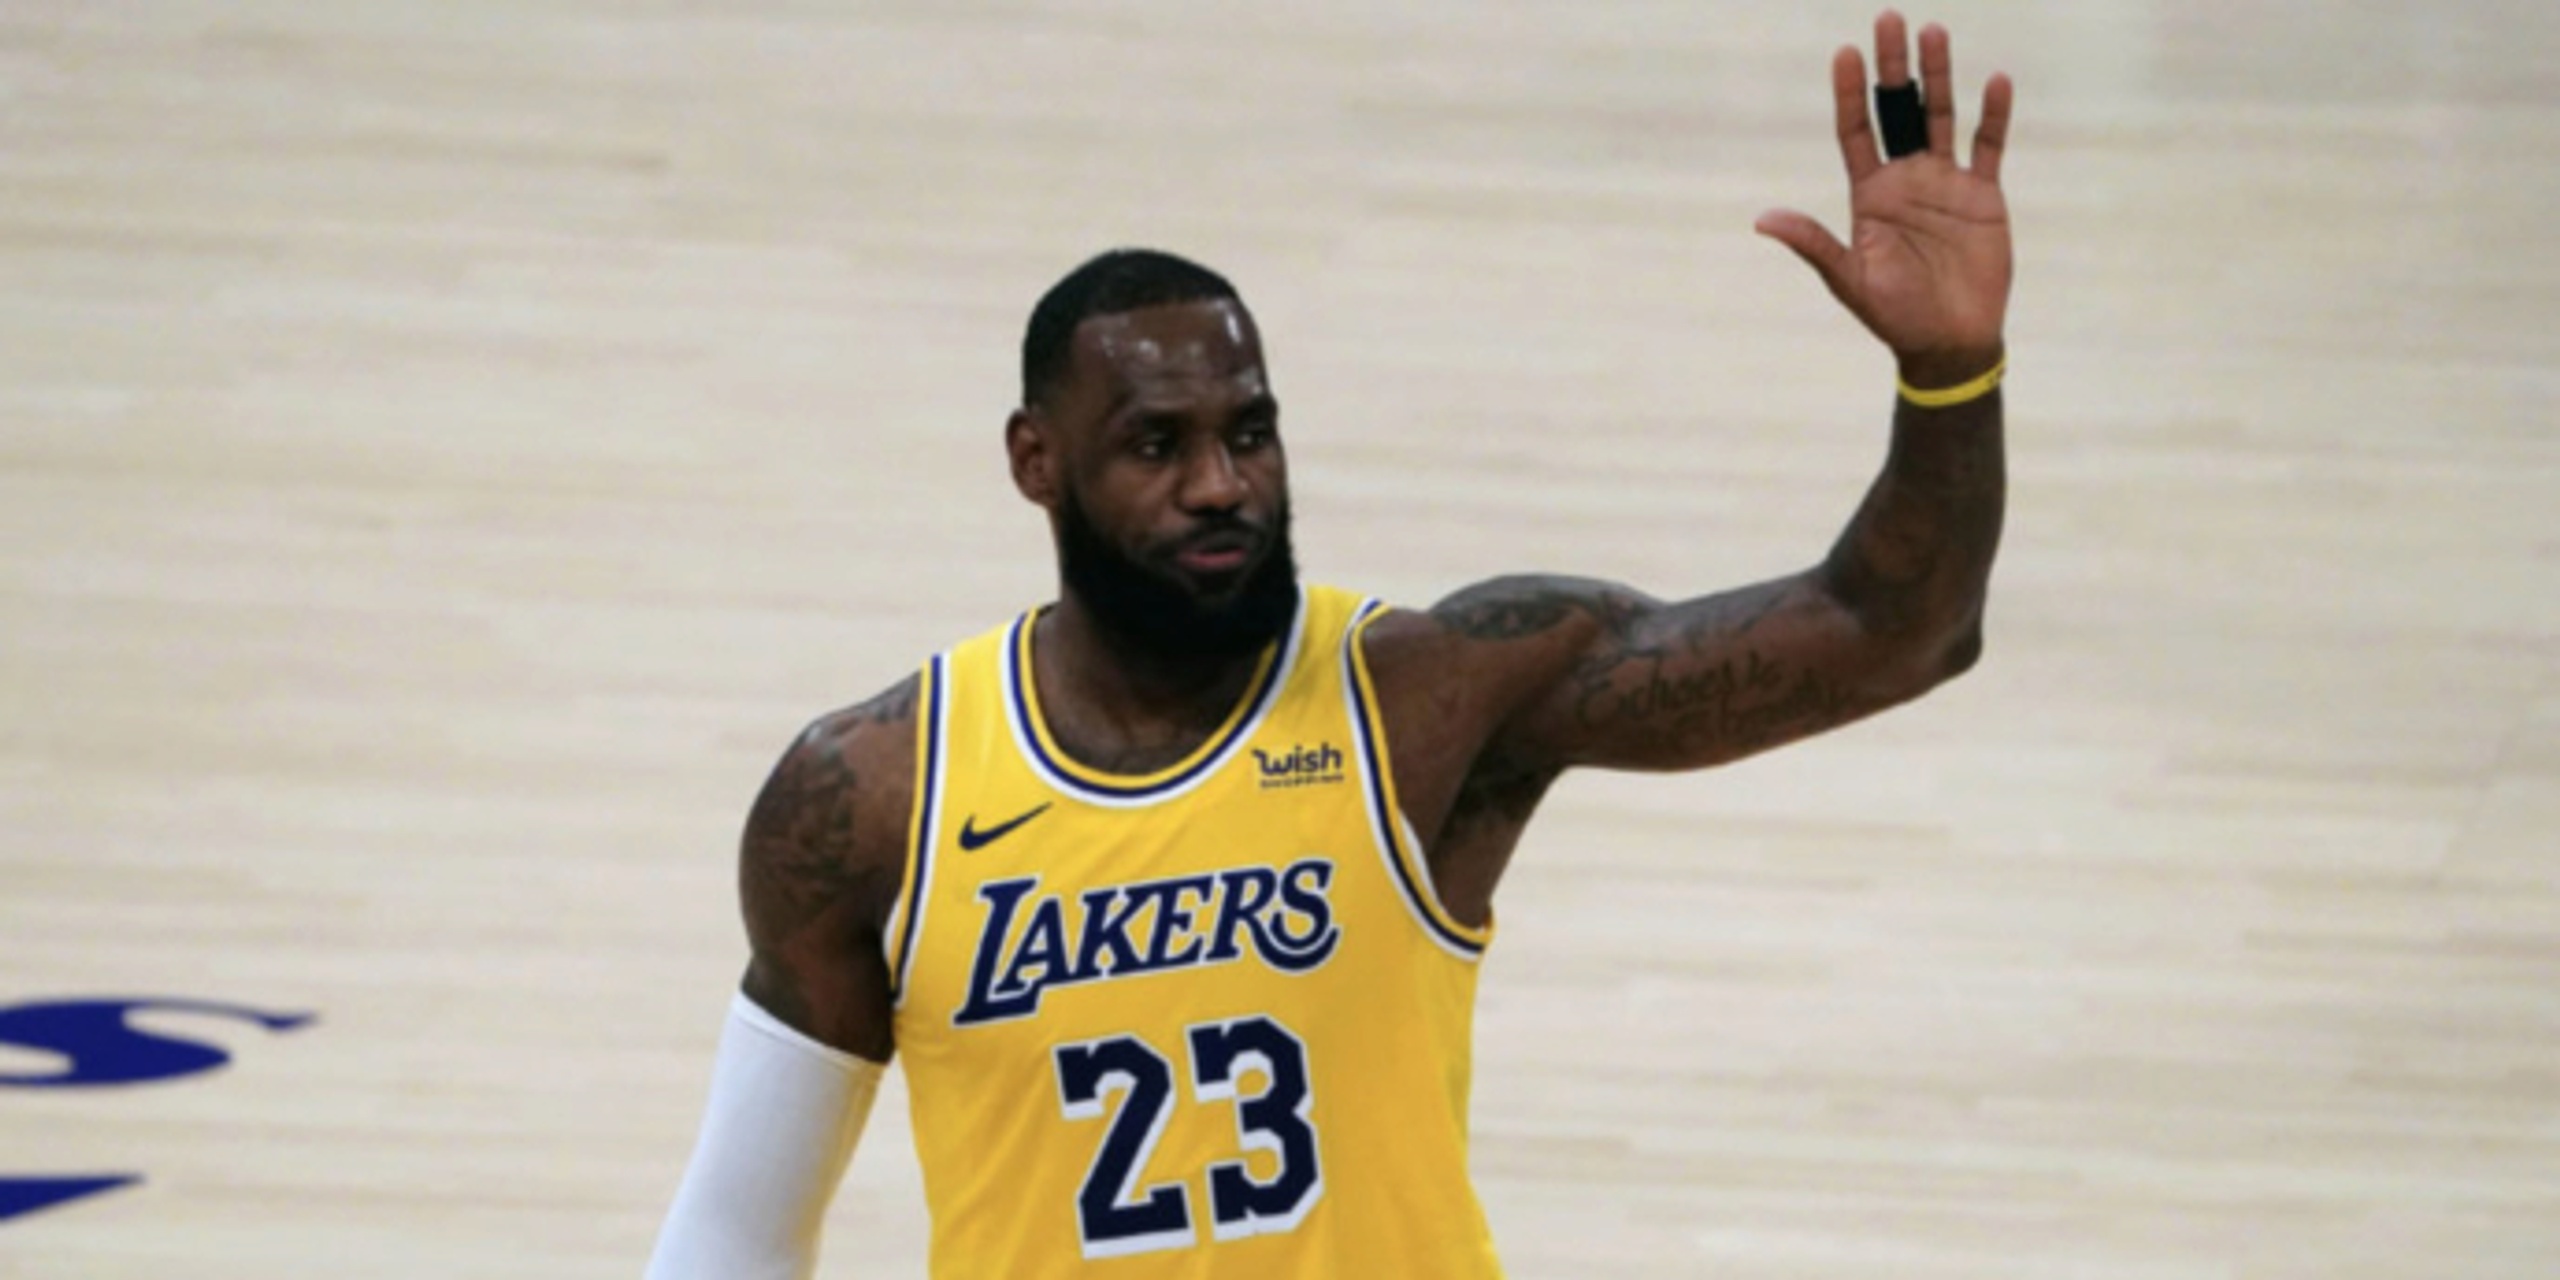 LeBron James becomes third player to score 35,000 career points